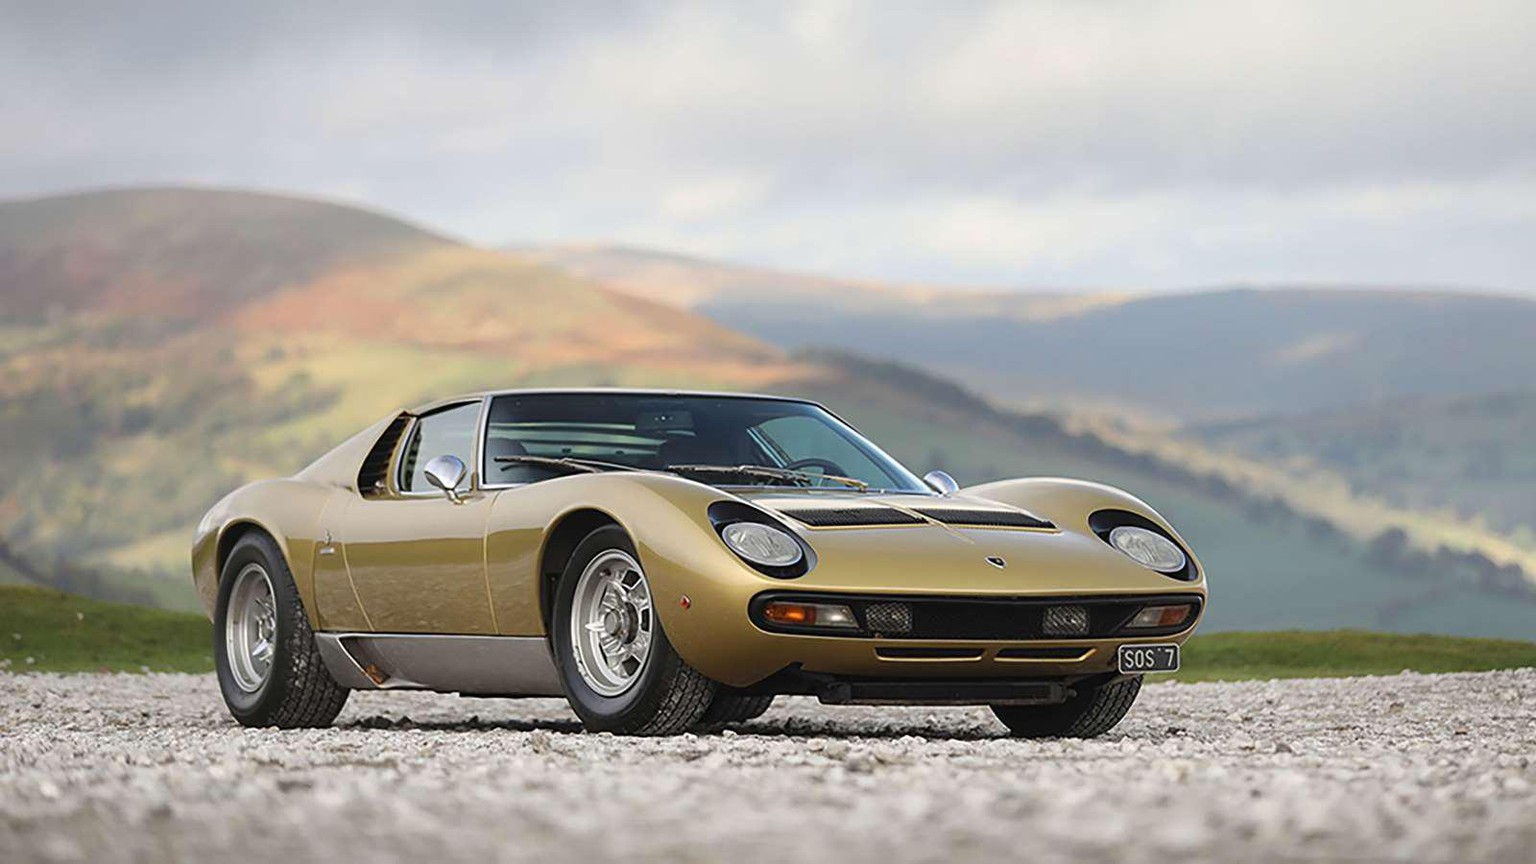 10. 1971 Lamborghini Miura P400 SV Speciale

Sold for £3,207,000 ($4,257,007)

Gooding &amp; Company; Passion of a Lifetime; 5 September, 2020

Even the roughest, rustiest Miura is a special and expen ...